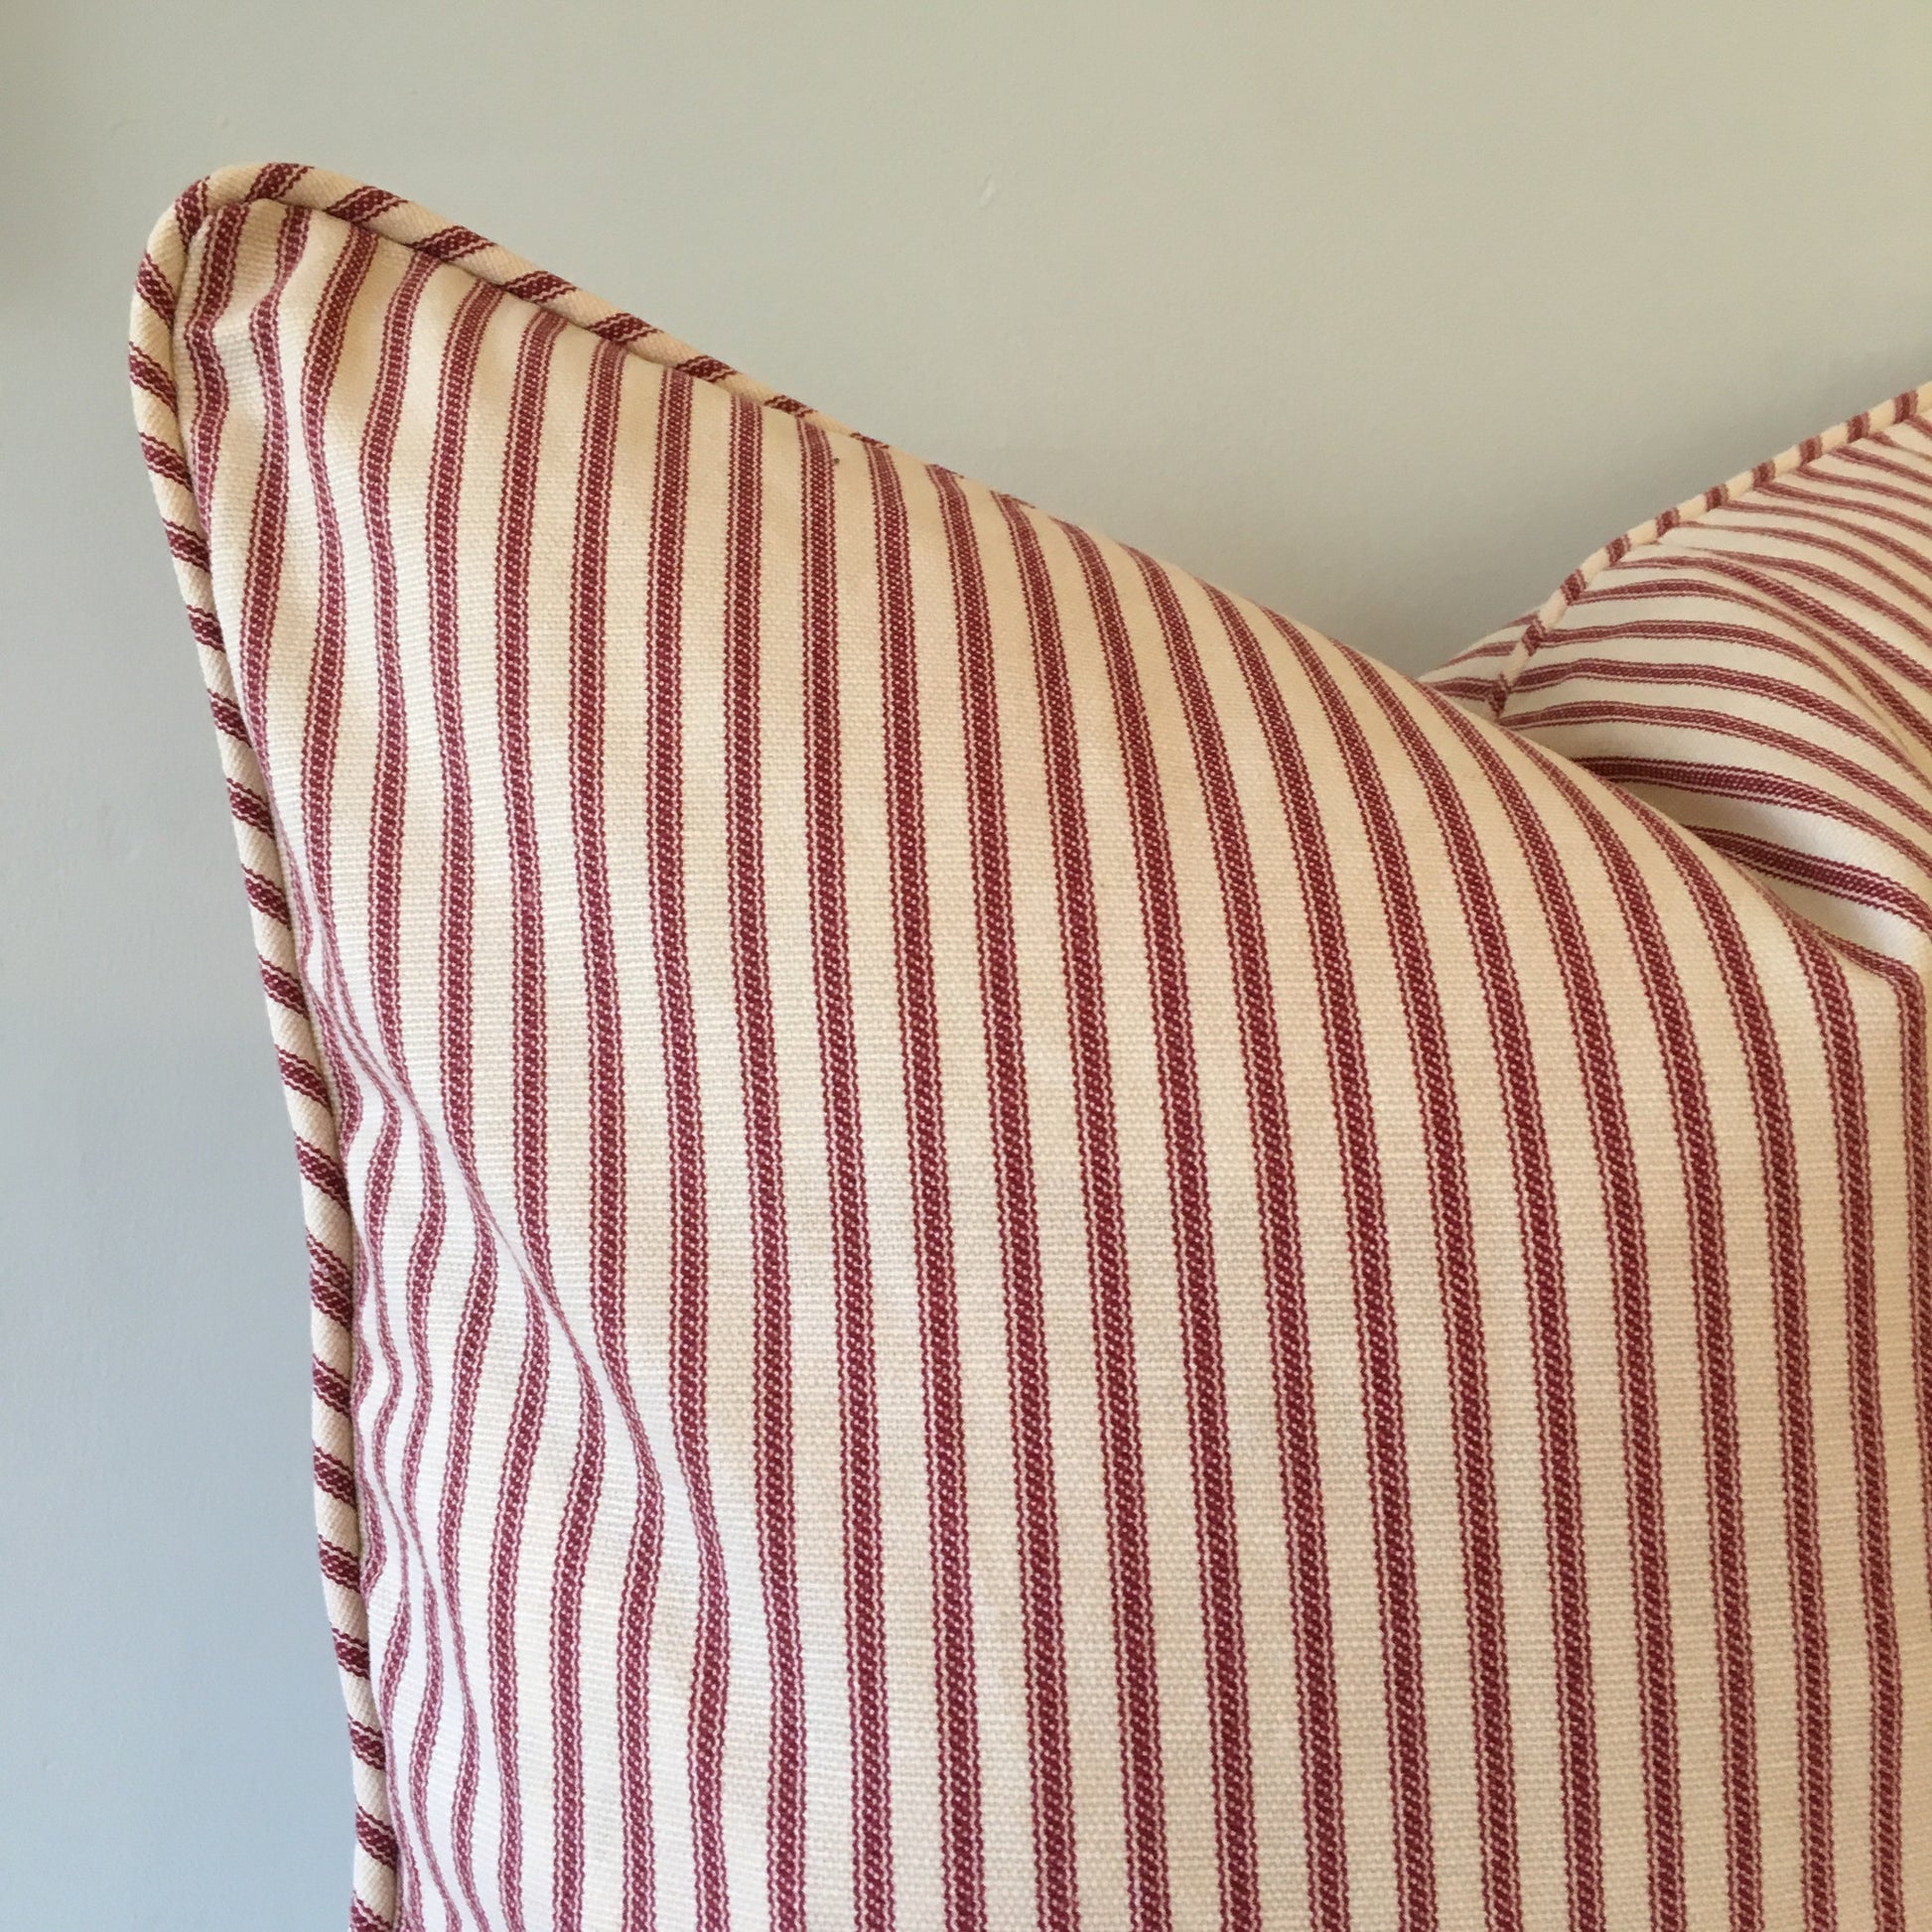 Red Ticking Stripe Throw Pillow Cover 18x18 – Southern Ticking Co.